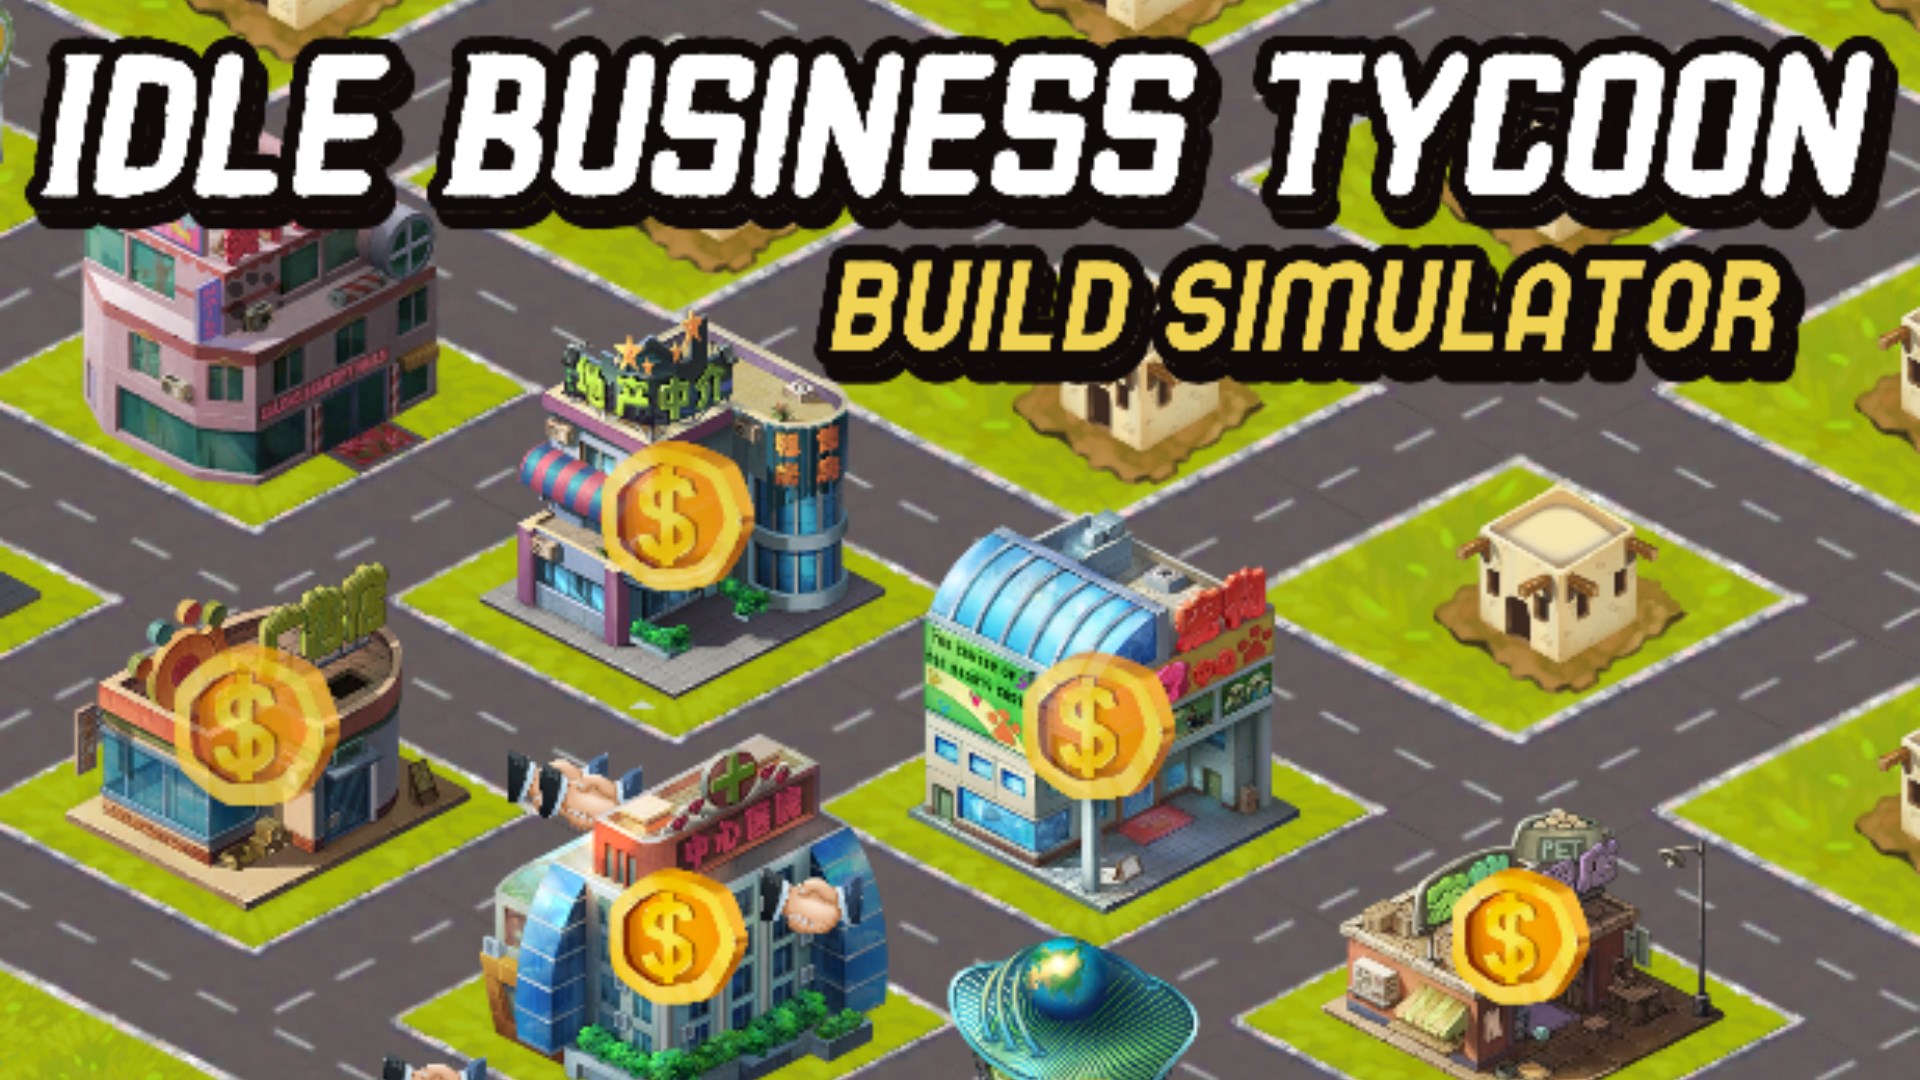 Idle Business Tycoon - Build Simulator on Steam